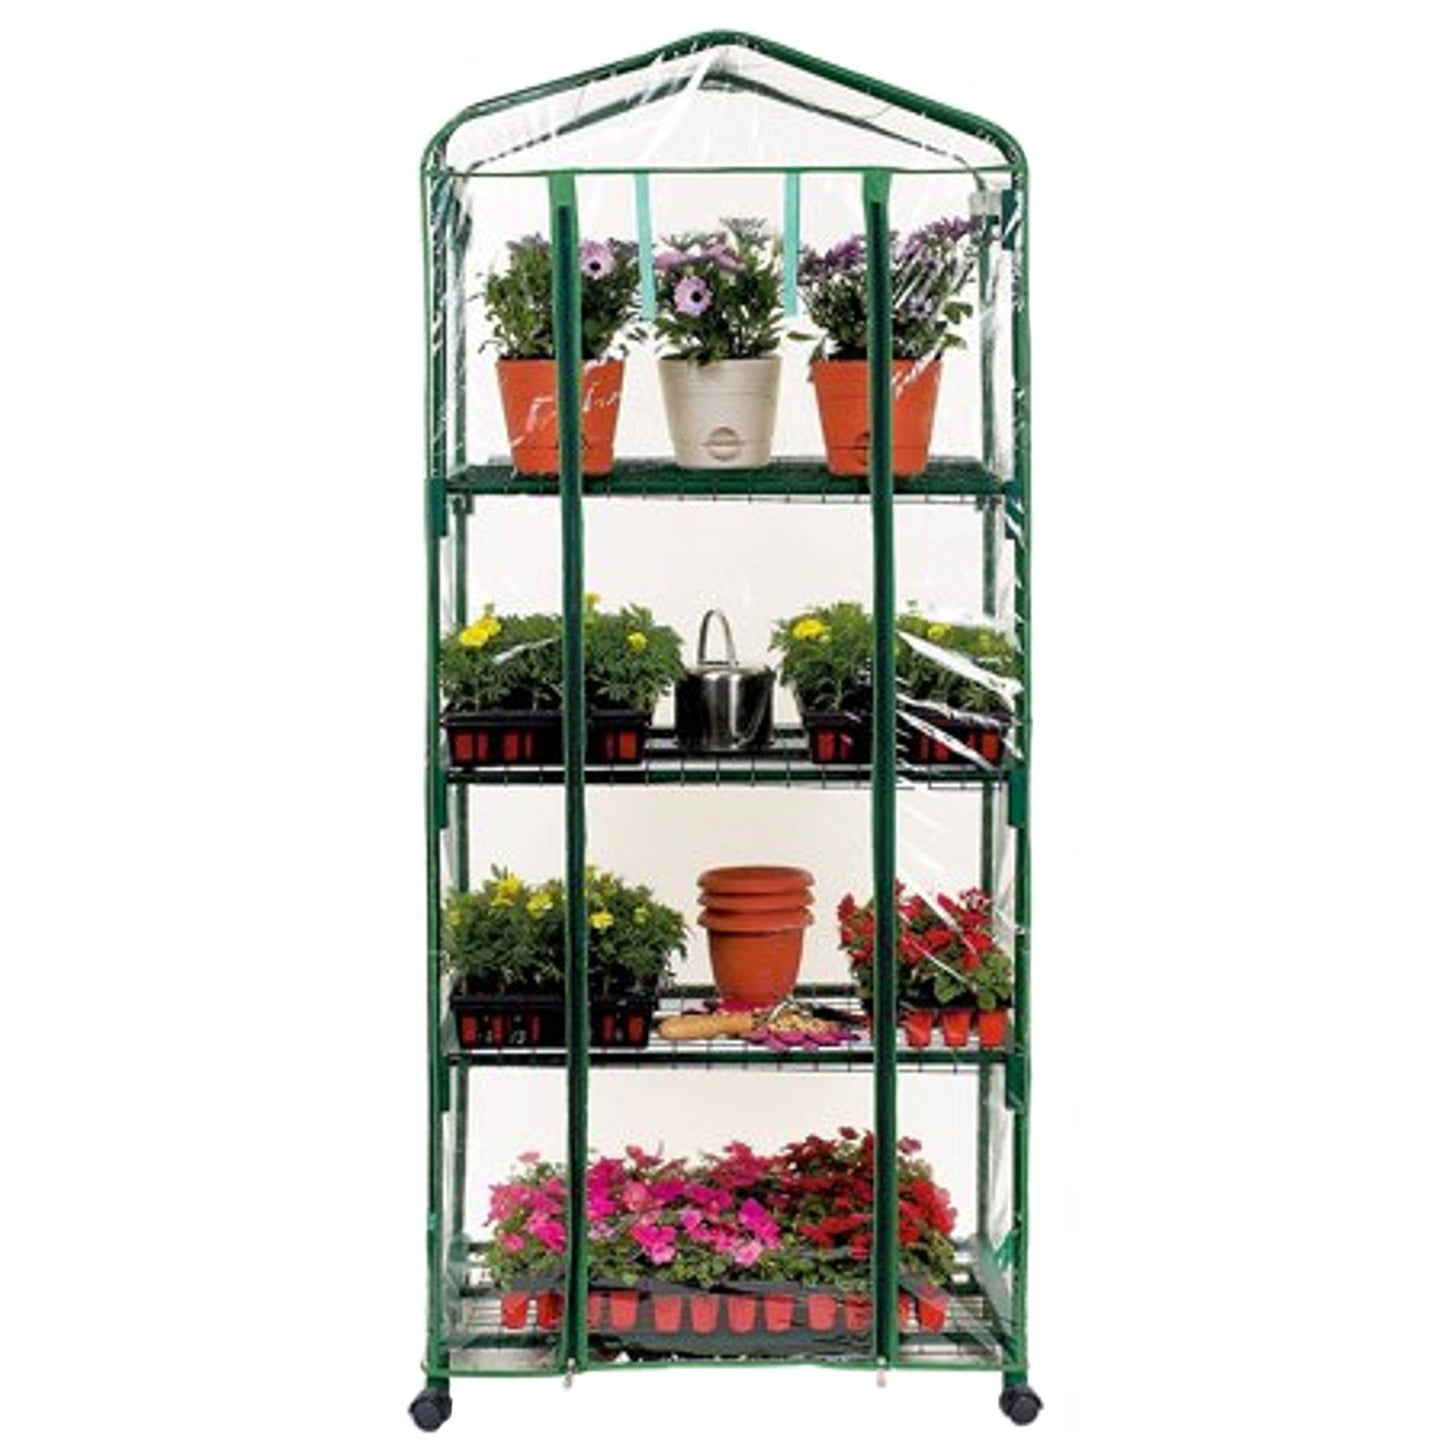 GENESIS 4 Tier Portable Rolling Greenhouse with Clear Cover GEN-4PVC